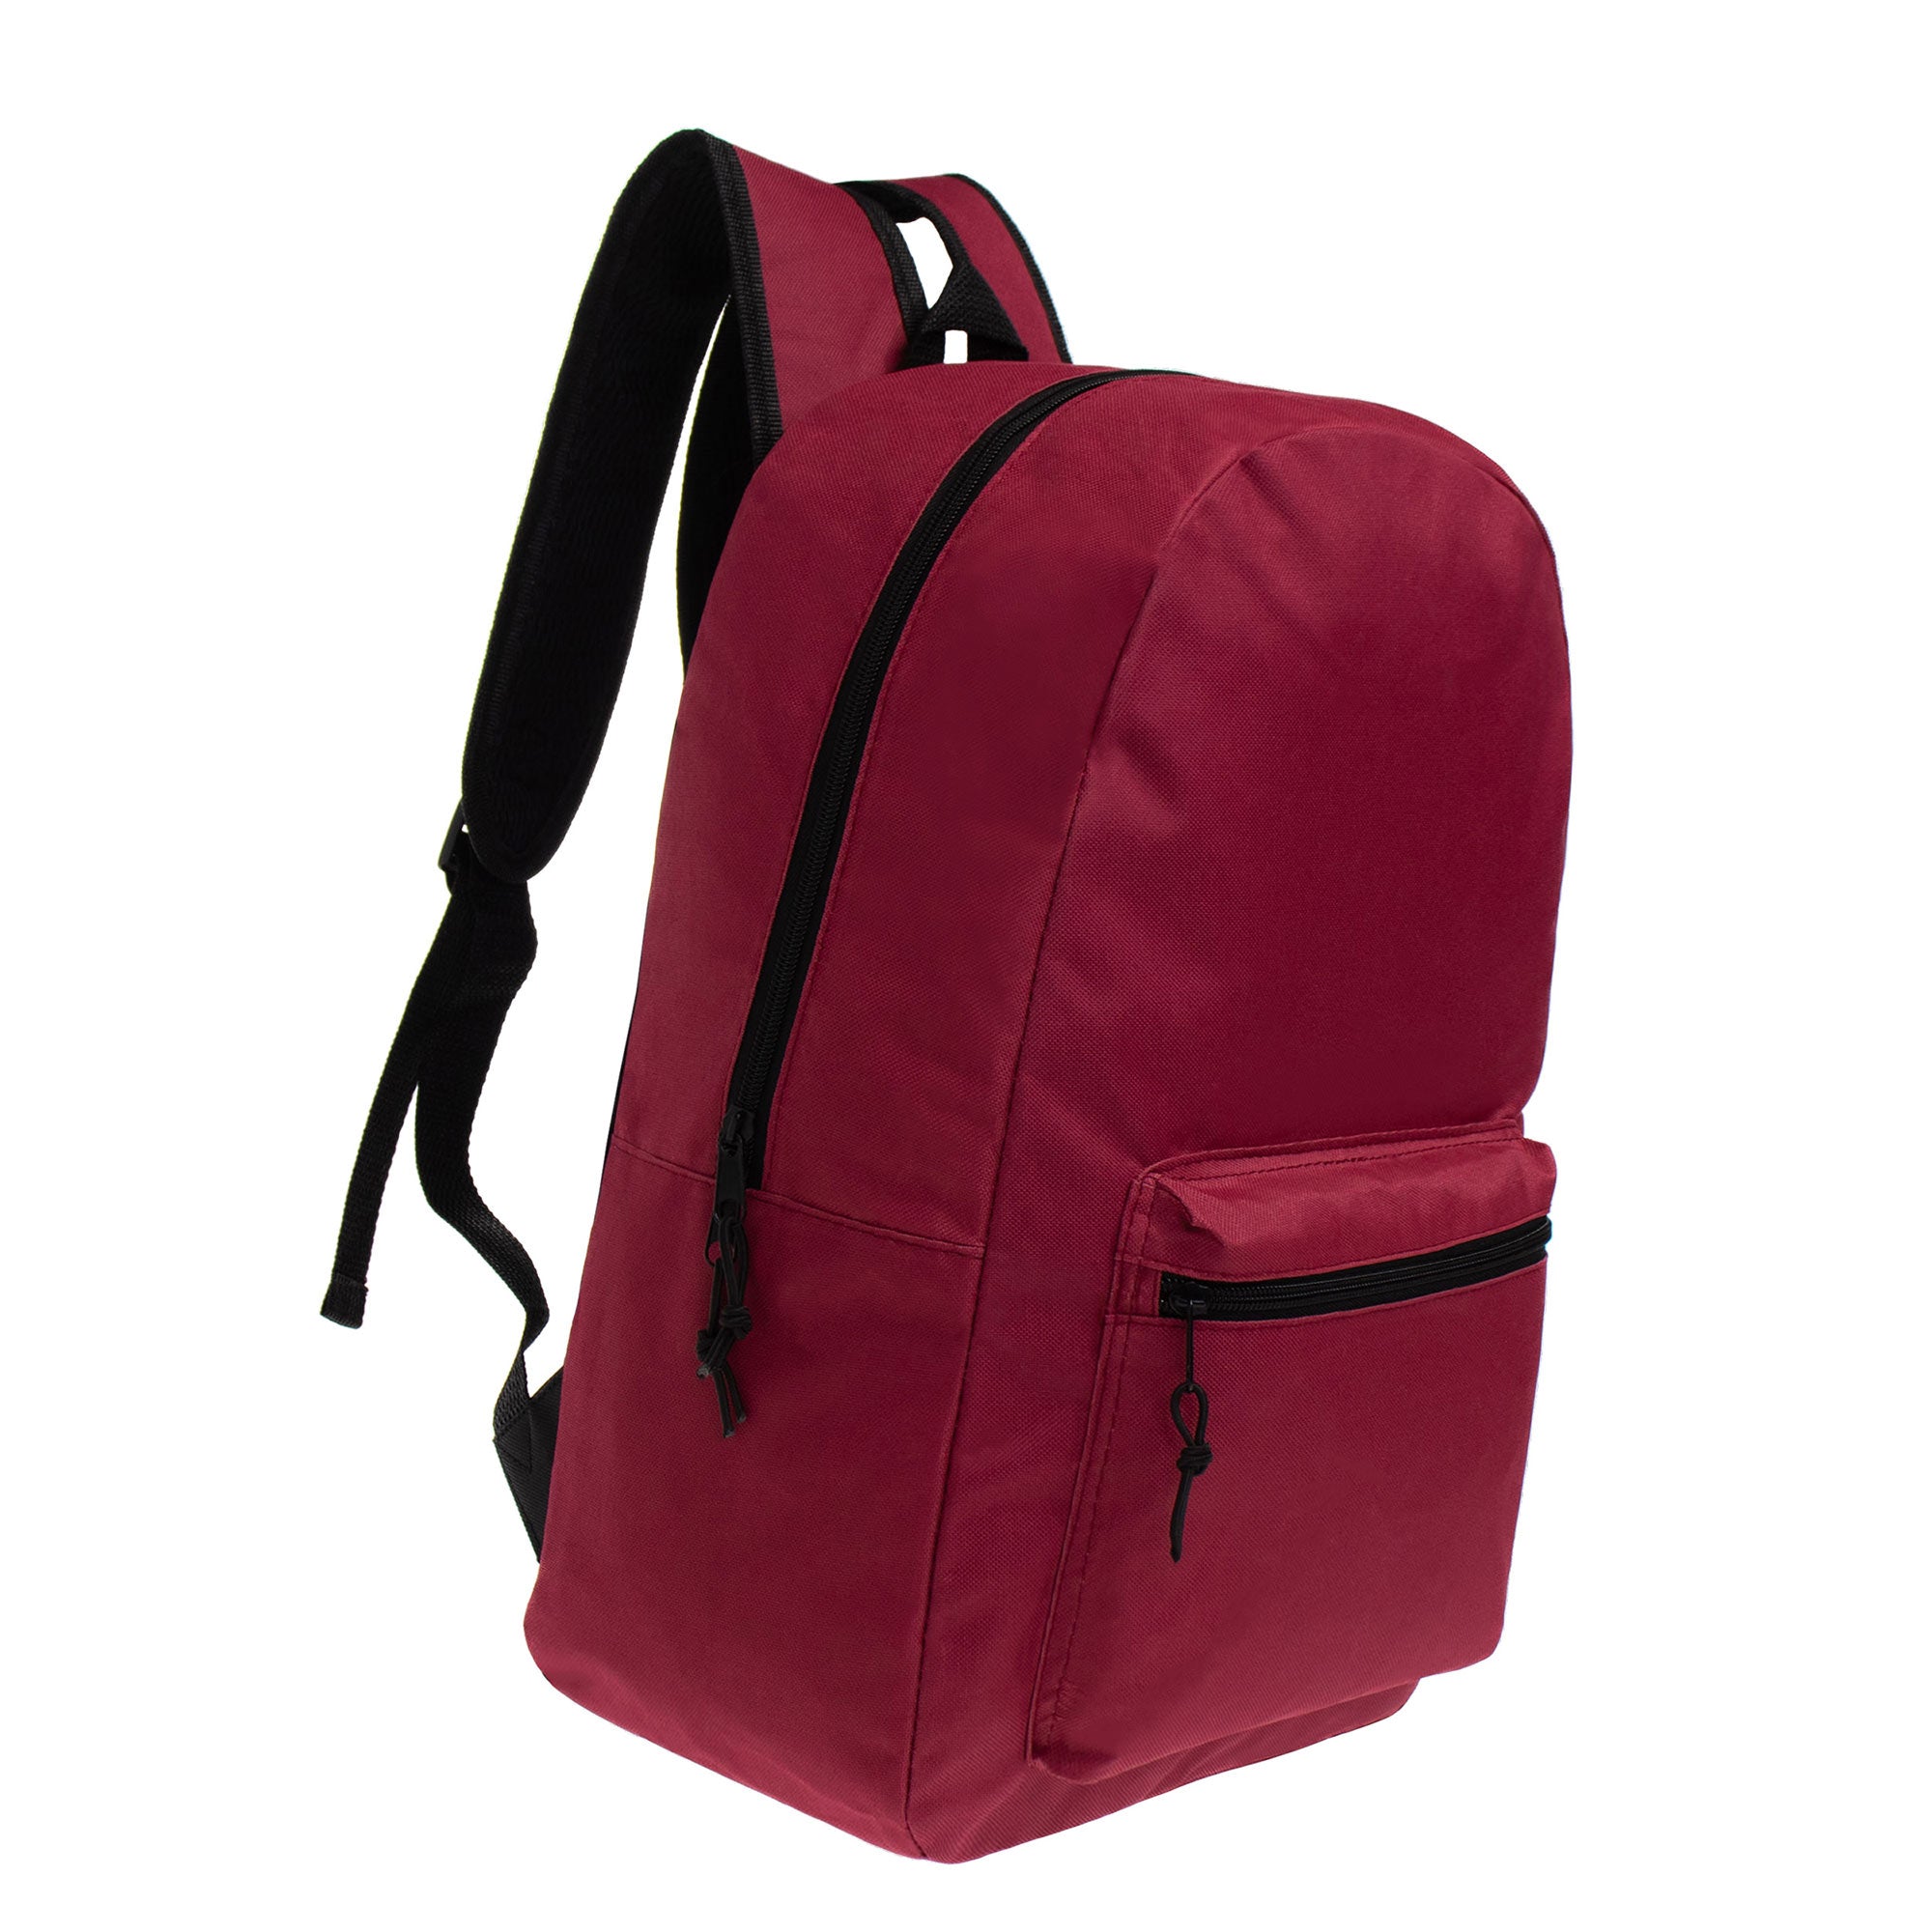 15 inch backpacks for kids or adults